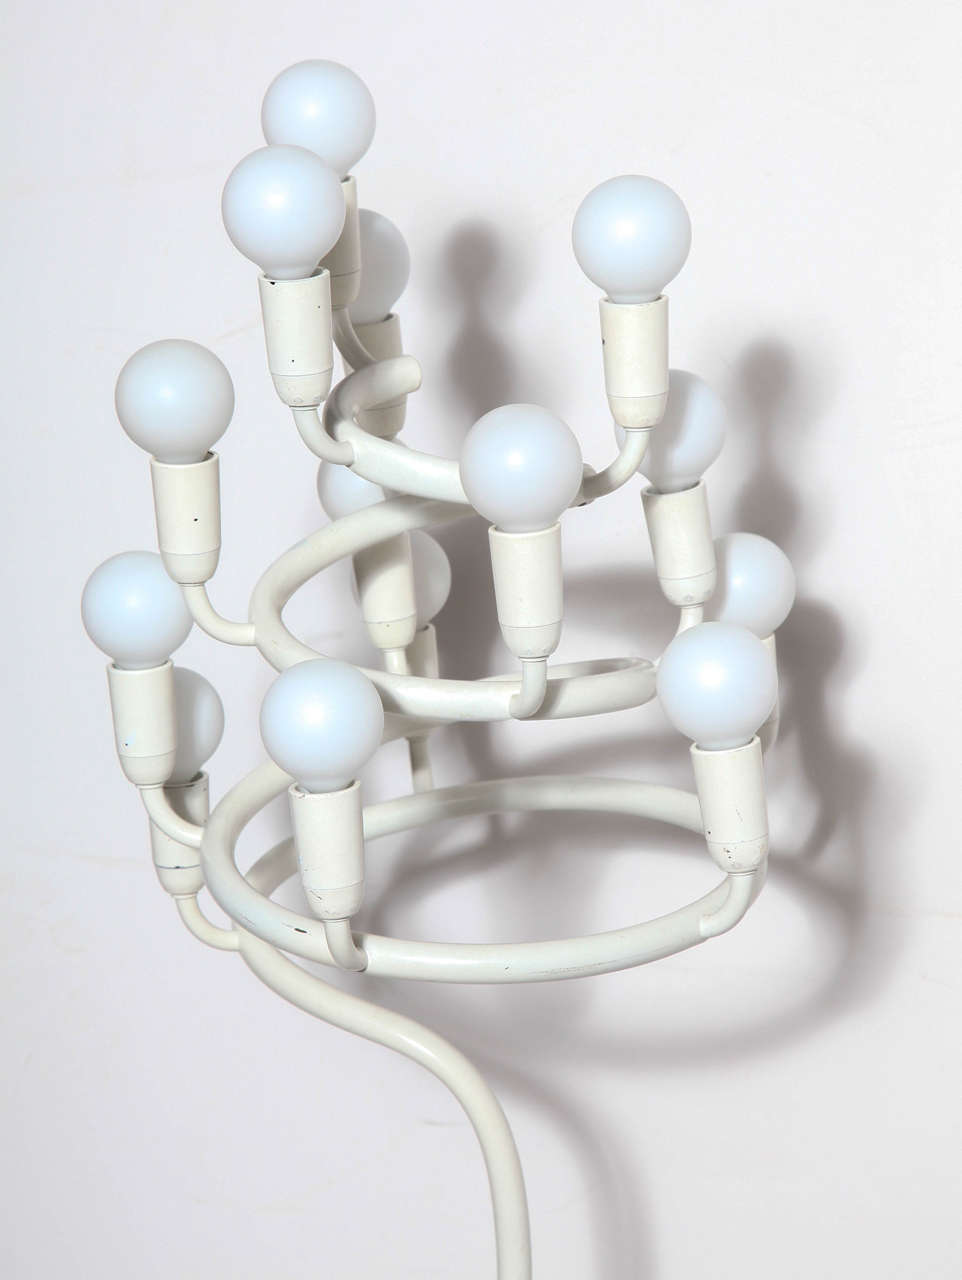 Scandinavian Modern Max Bill White Enameled Spiral Floor Lamp, 1960's. Featuring an off-white enameled metal tubular stem, spiral top highlighted with 14 frosted white glass candelabra bulbs on 8.5